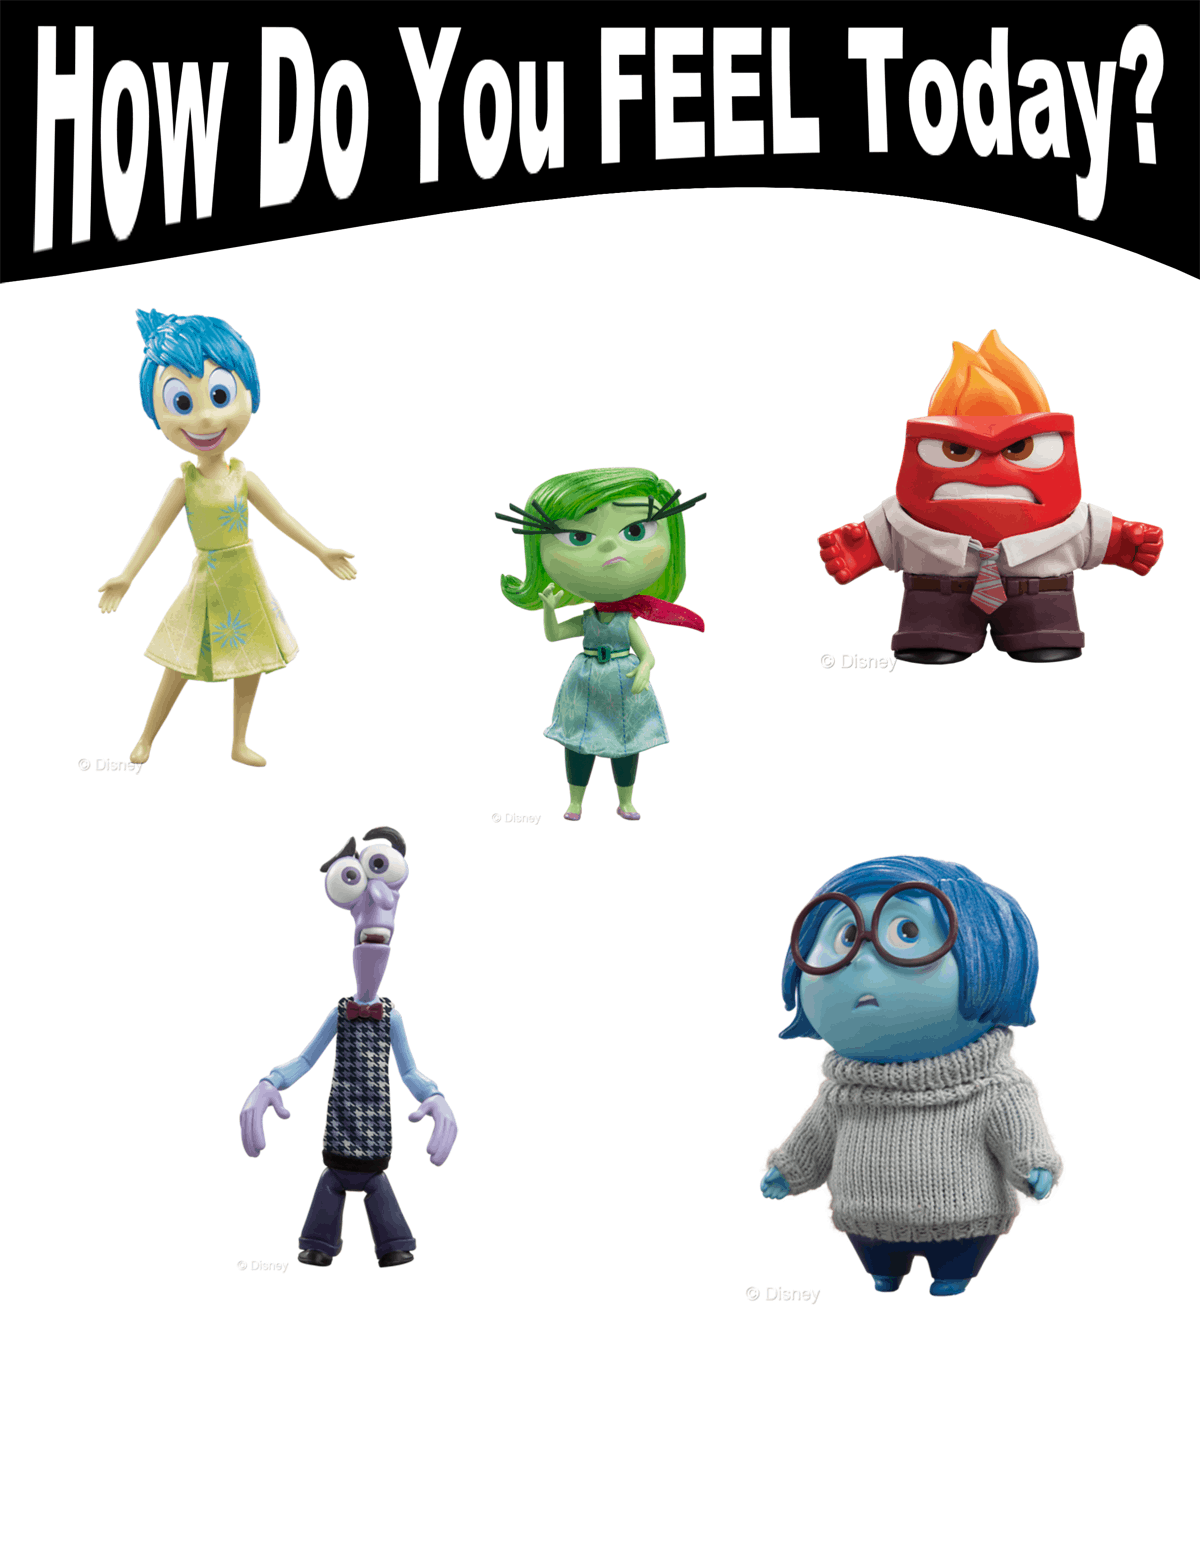 Emotion Chart Inside Out